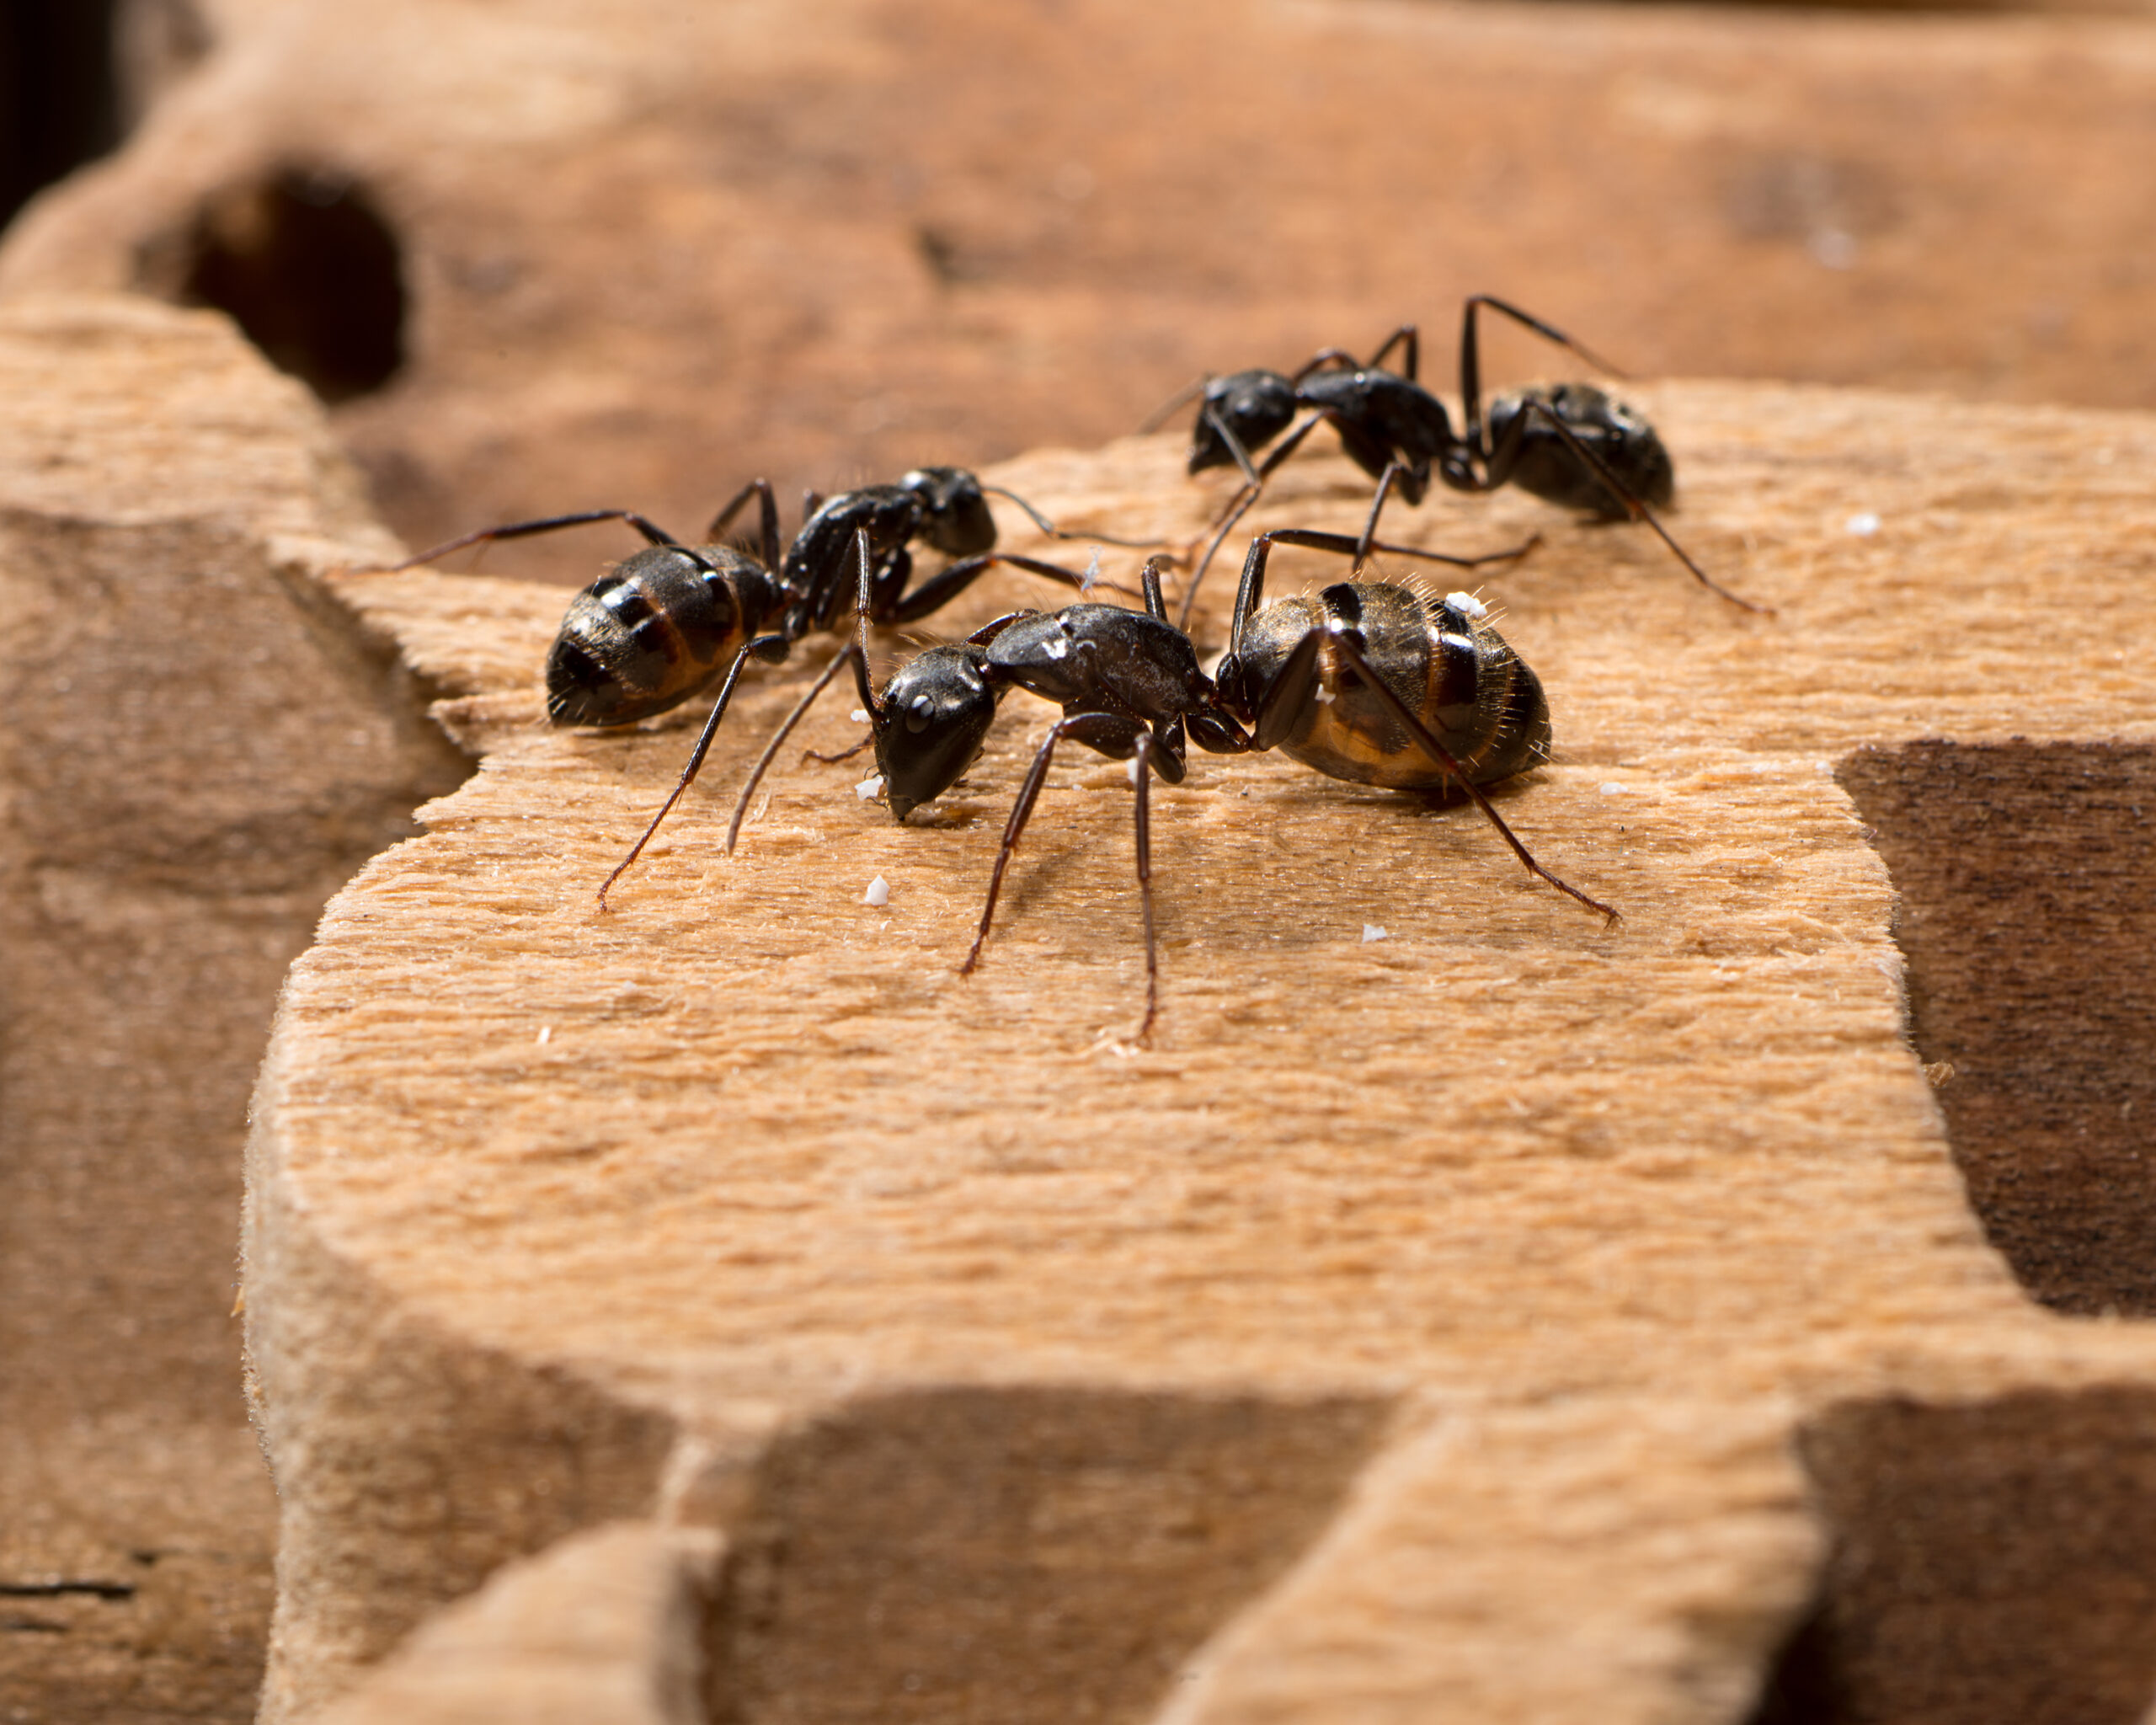 Early risers: Why are there big ants in my home?